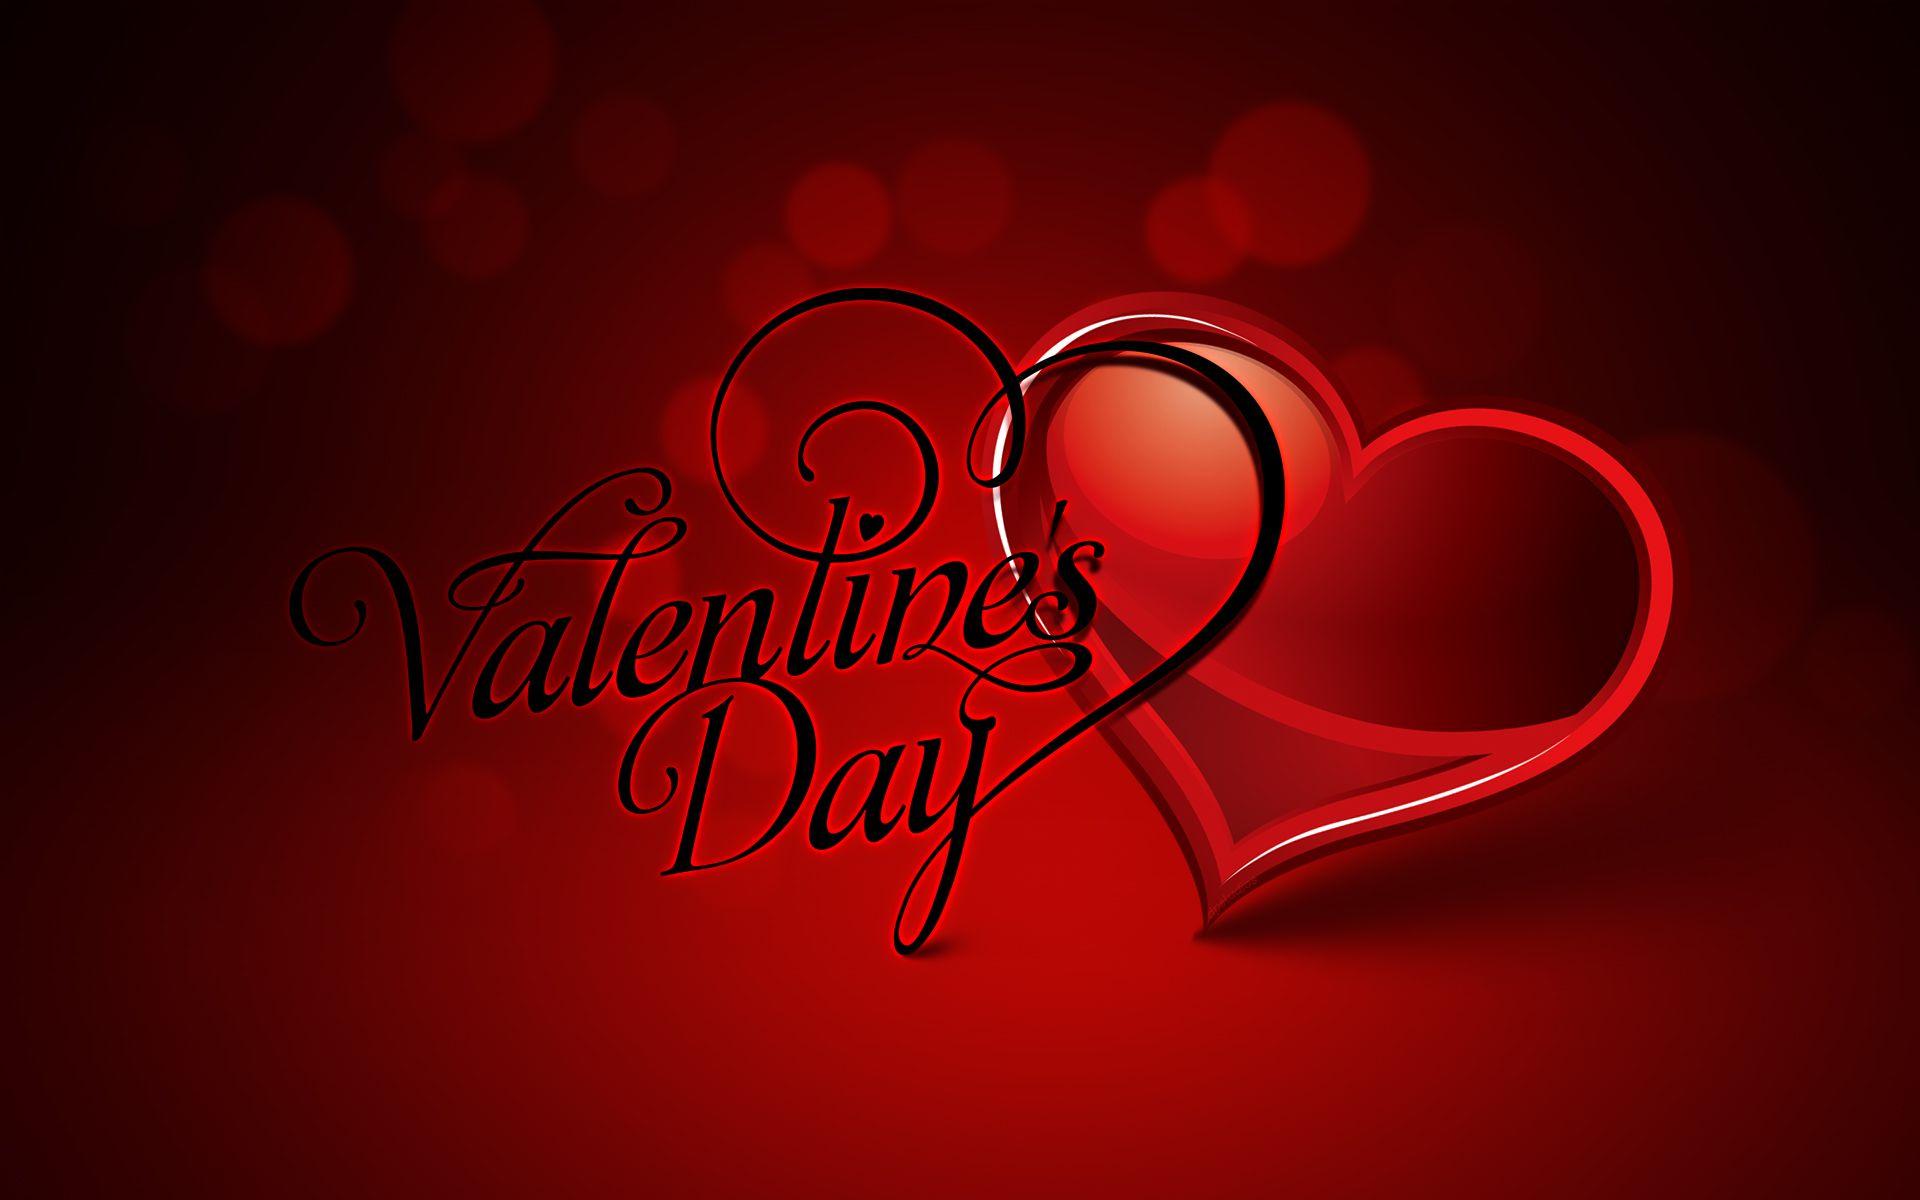 Happy Valentines Day HD # 2560x1600. All For Desktop